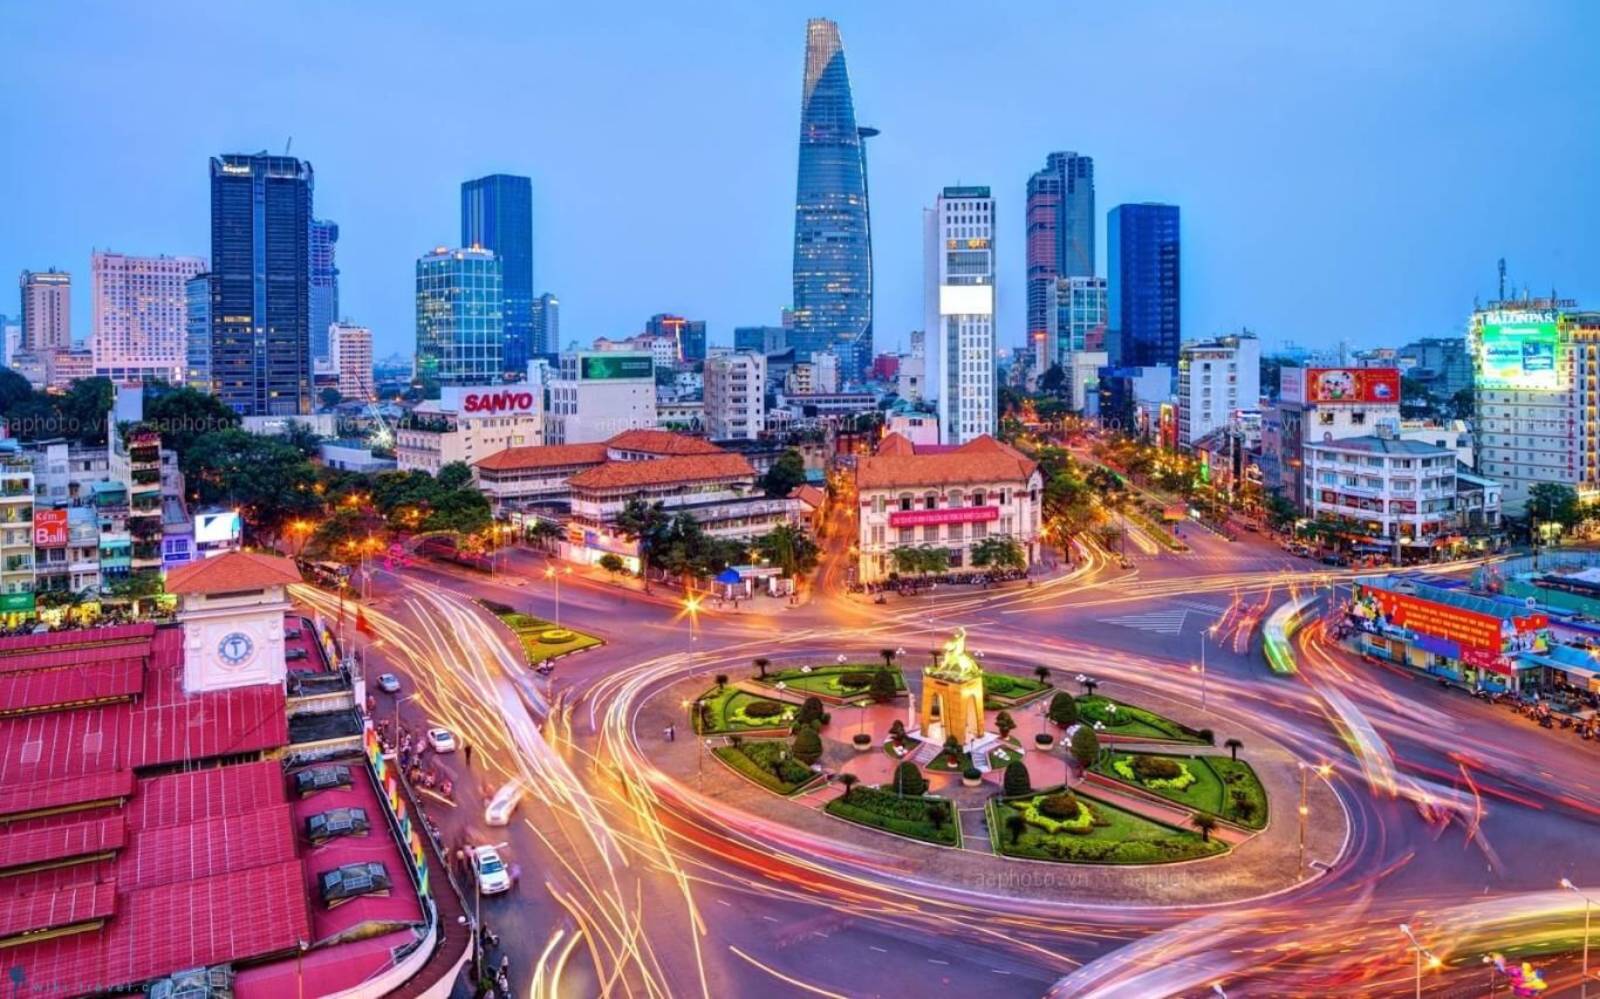 Tours starting from Ho Chi Minh City - Tour Packages and Vacation | AOJourneys